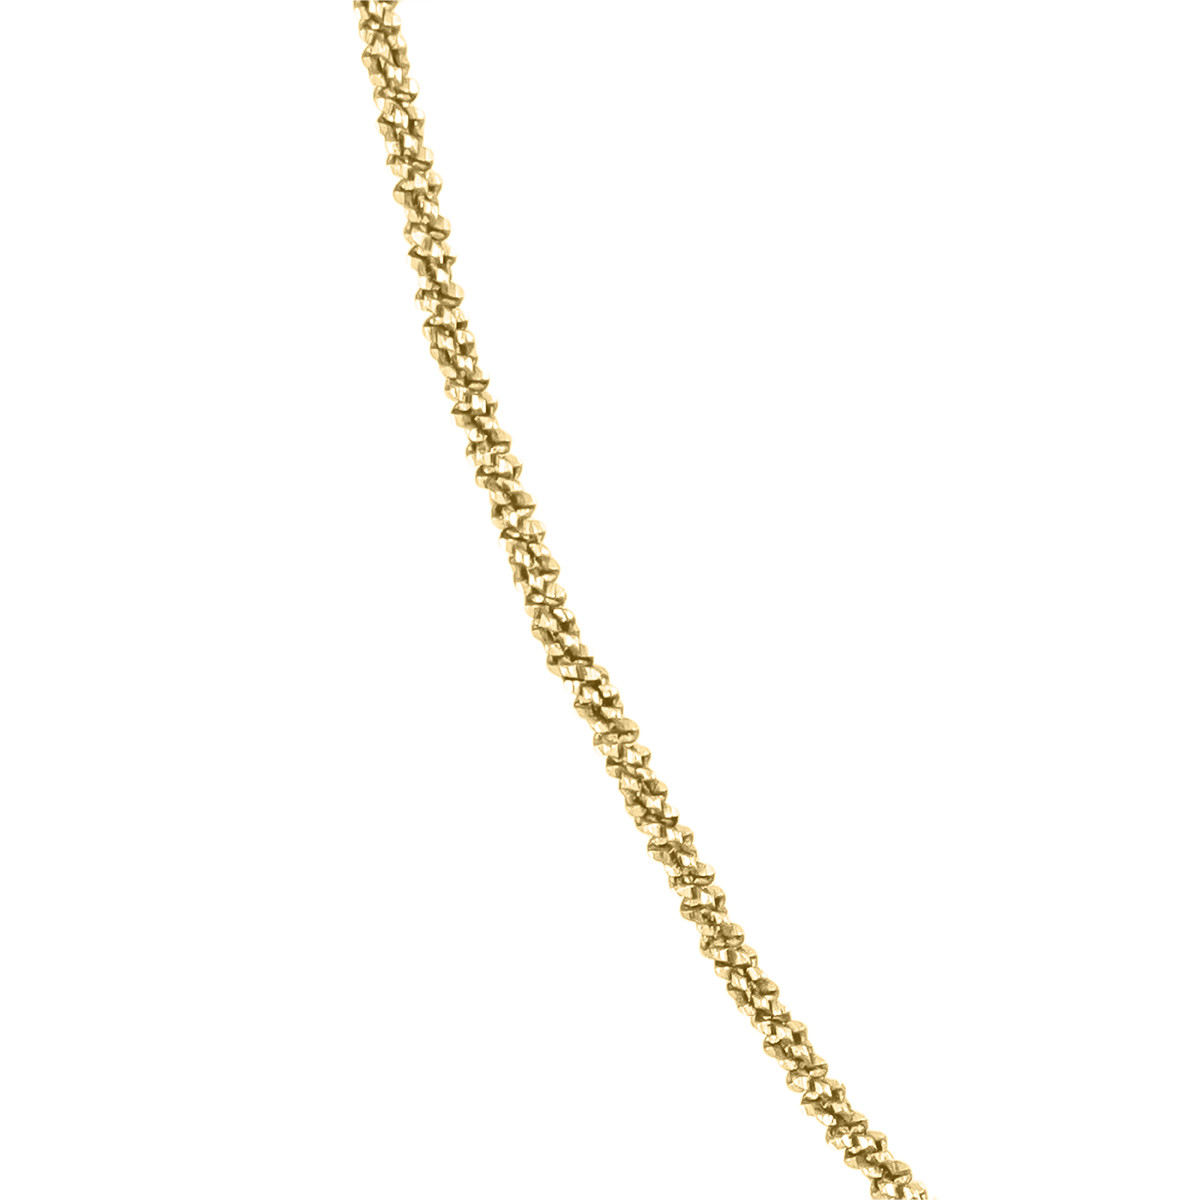 Tomfoolery, Gold Plated Silver Single Chain Necklace, Lindenau